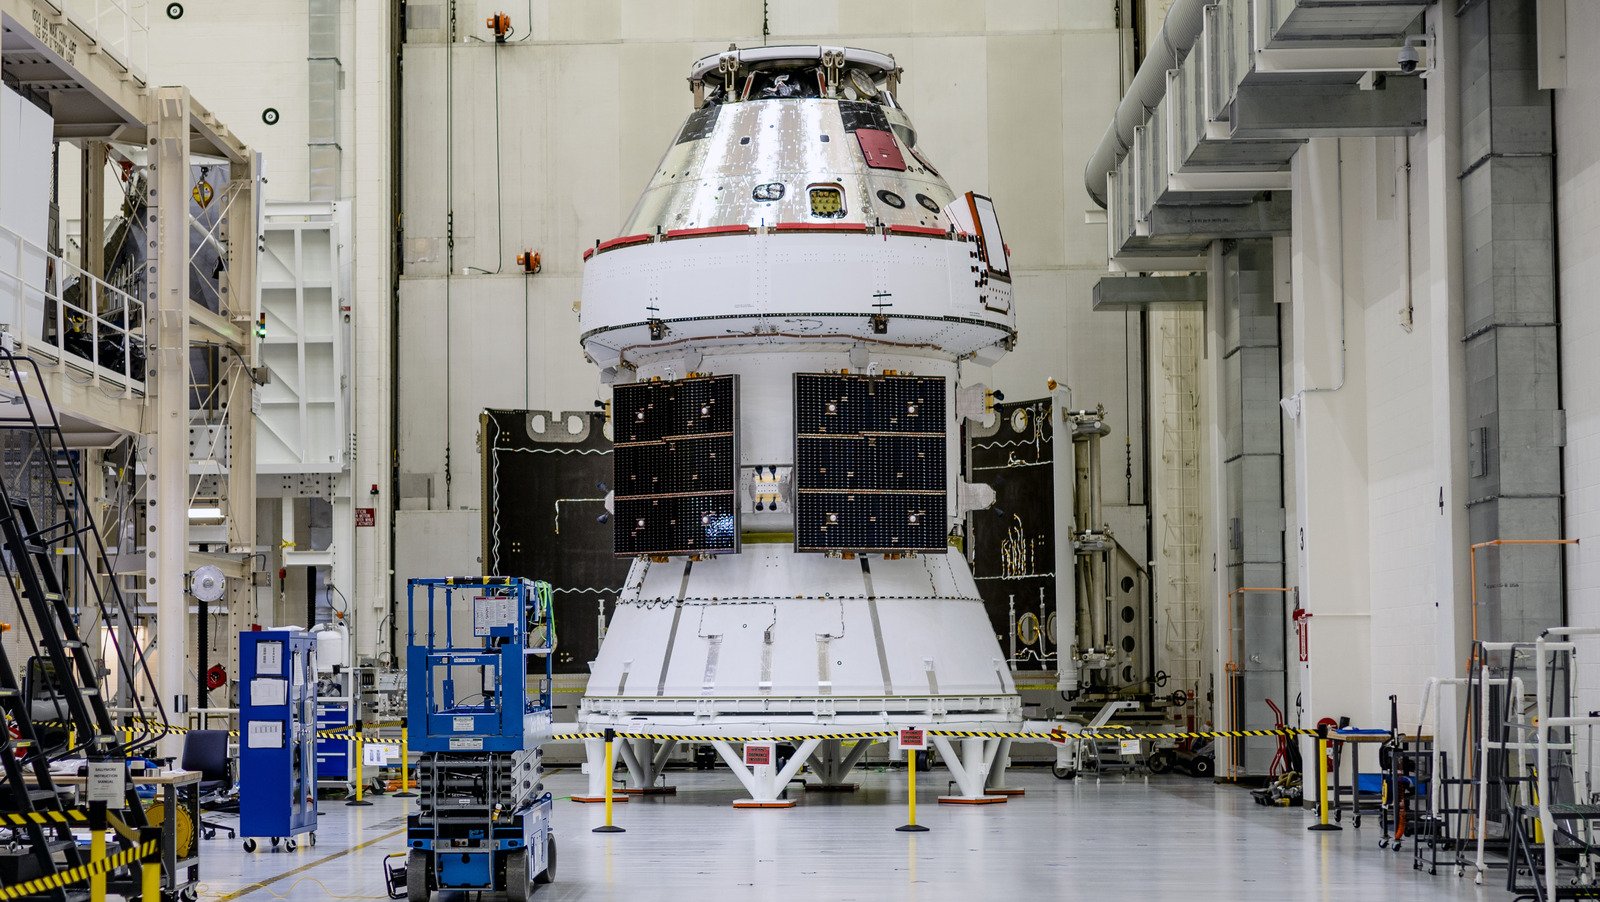 NASA's Orion: Everything We Know About The Spacecraft That Will Carry Astronauts To The Moon